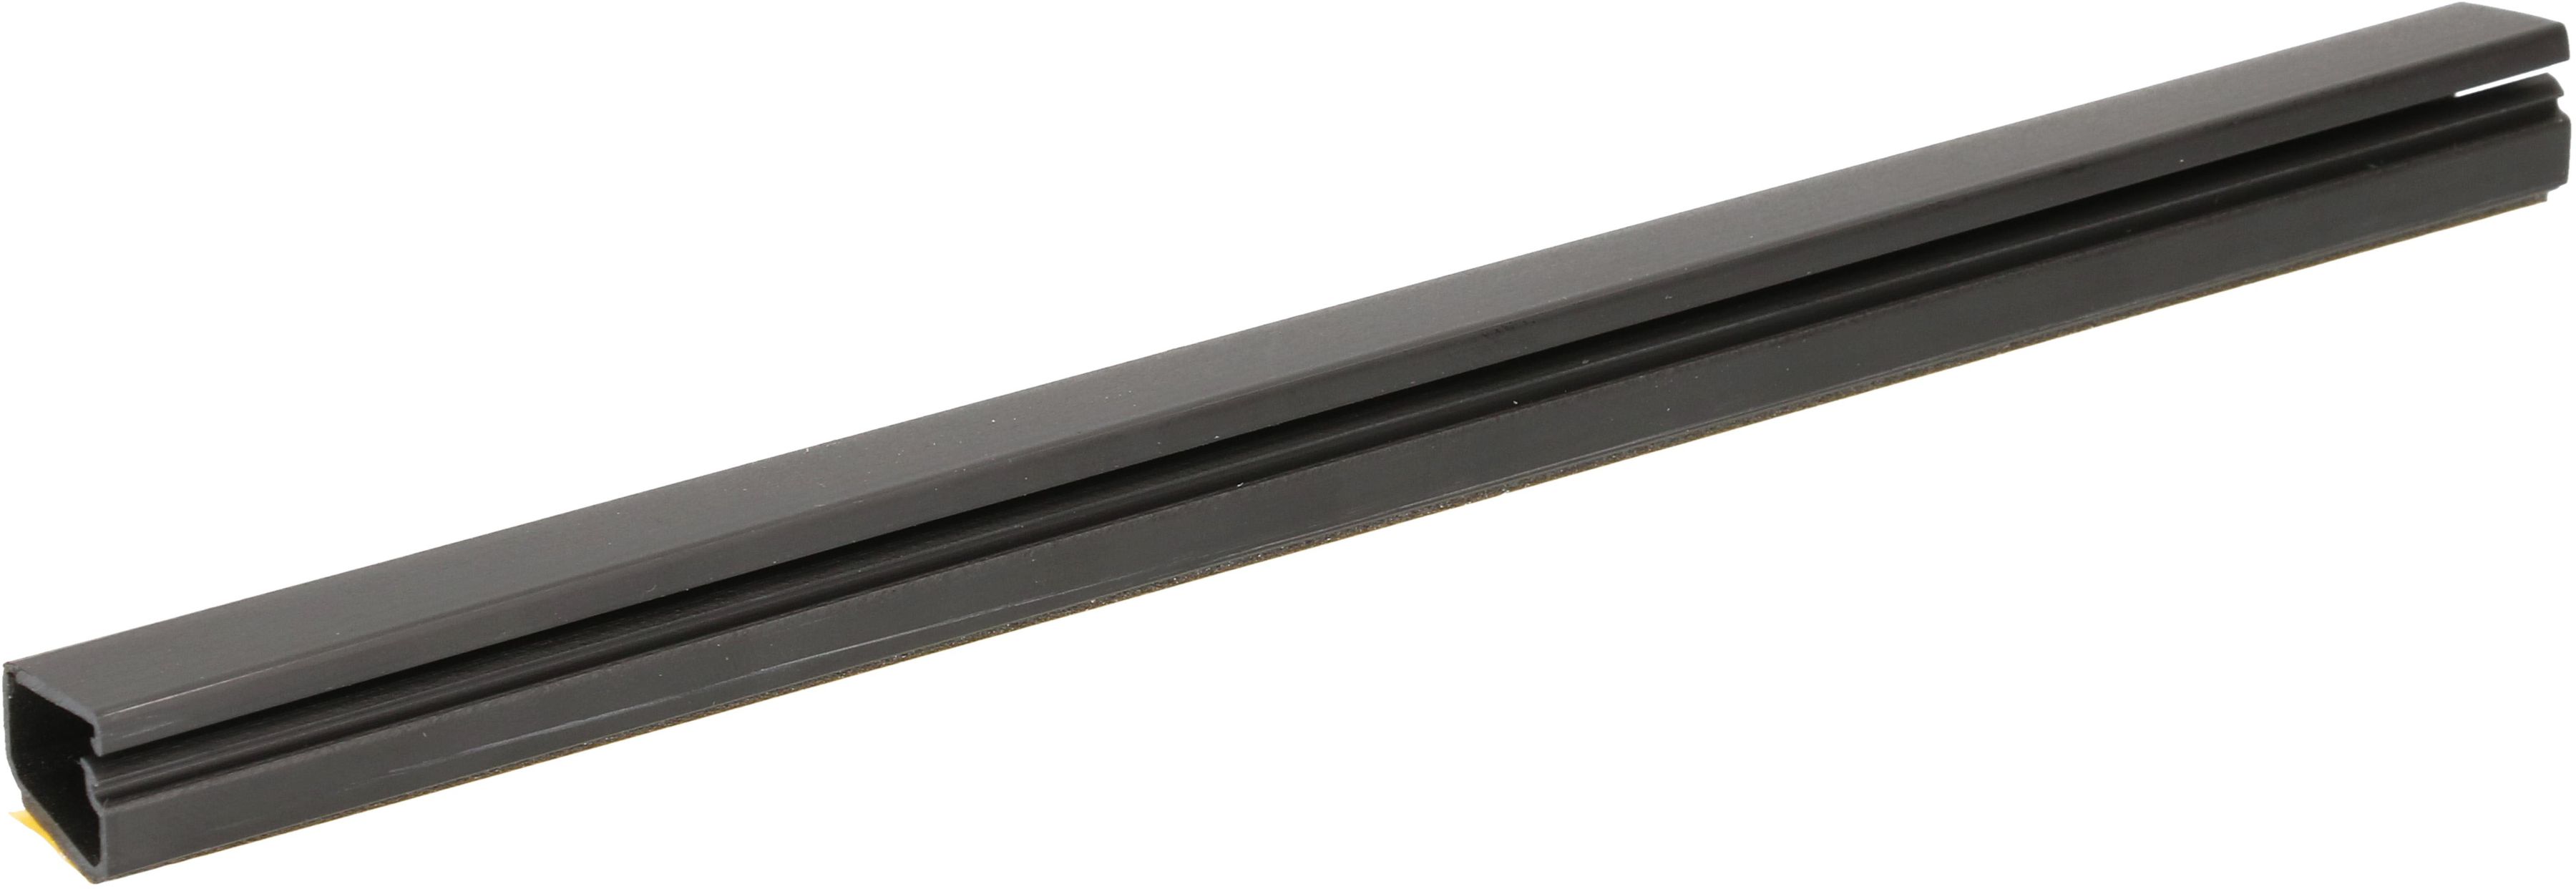 Cable duct 16x10mm black